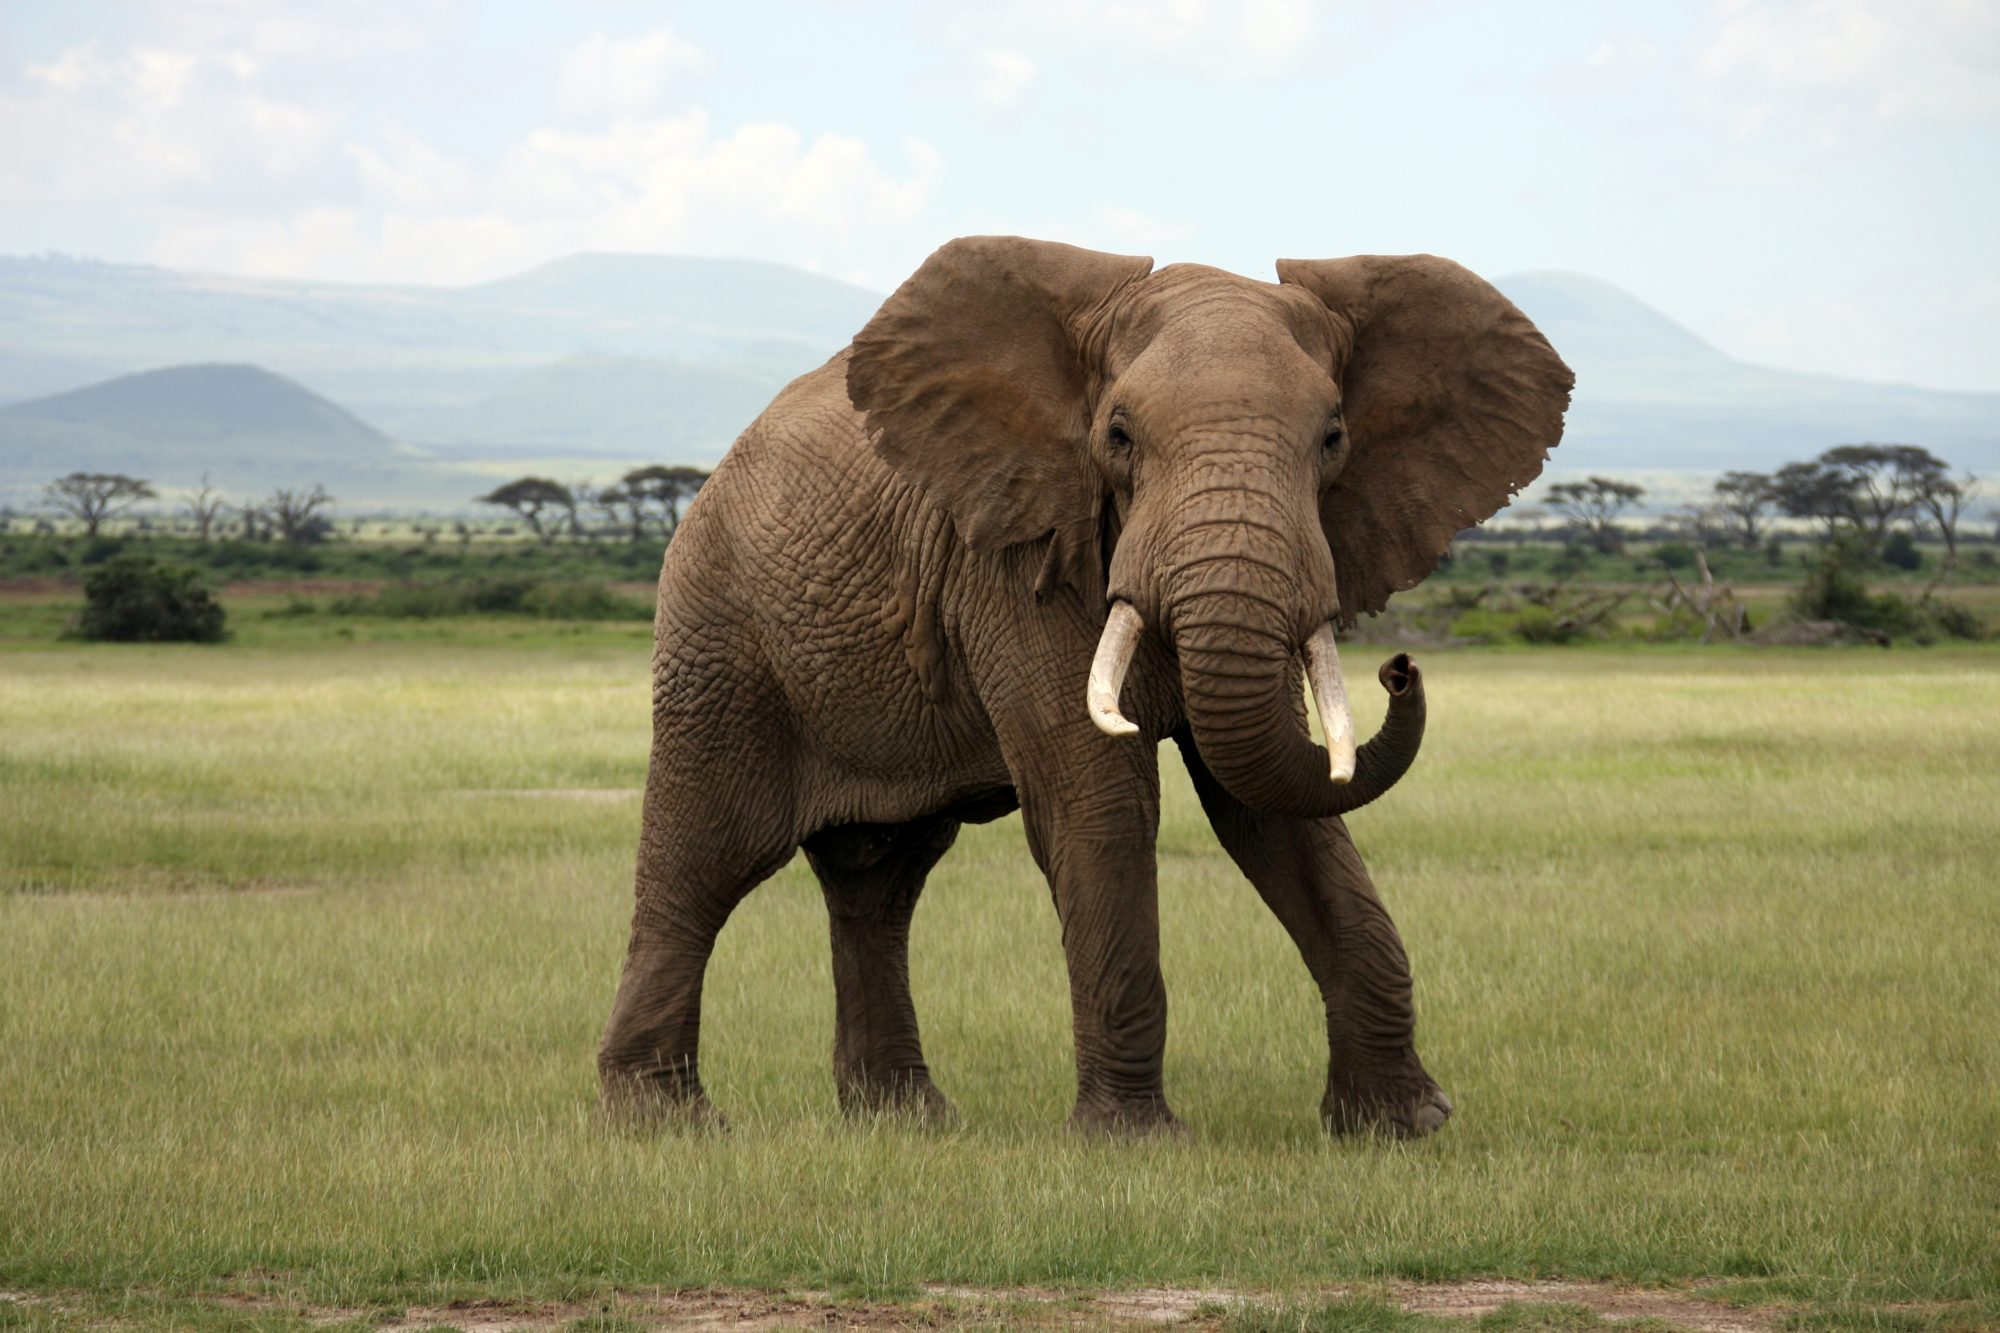 A “complexity” approach to human-elephant coexistence